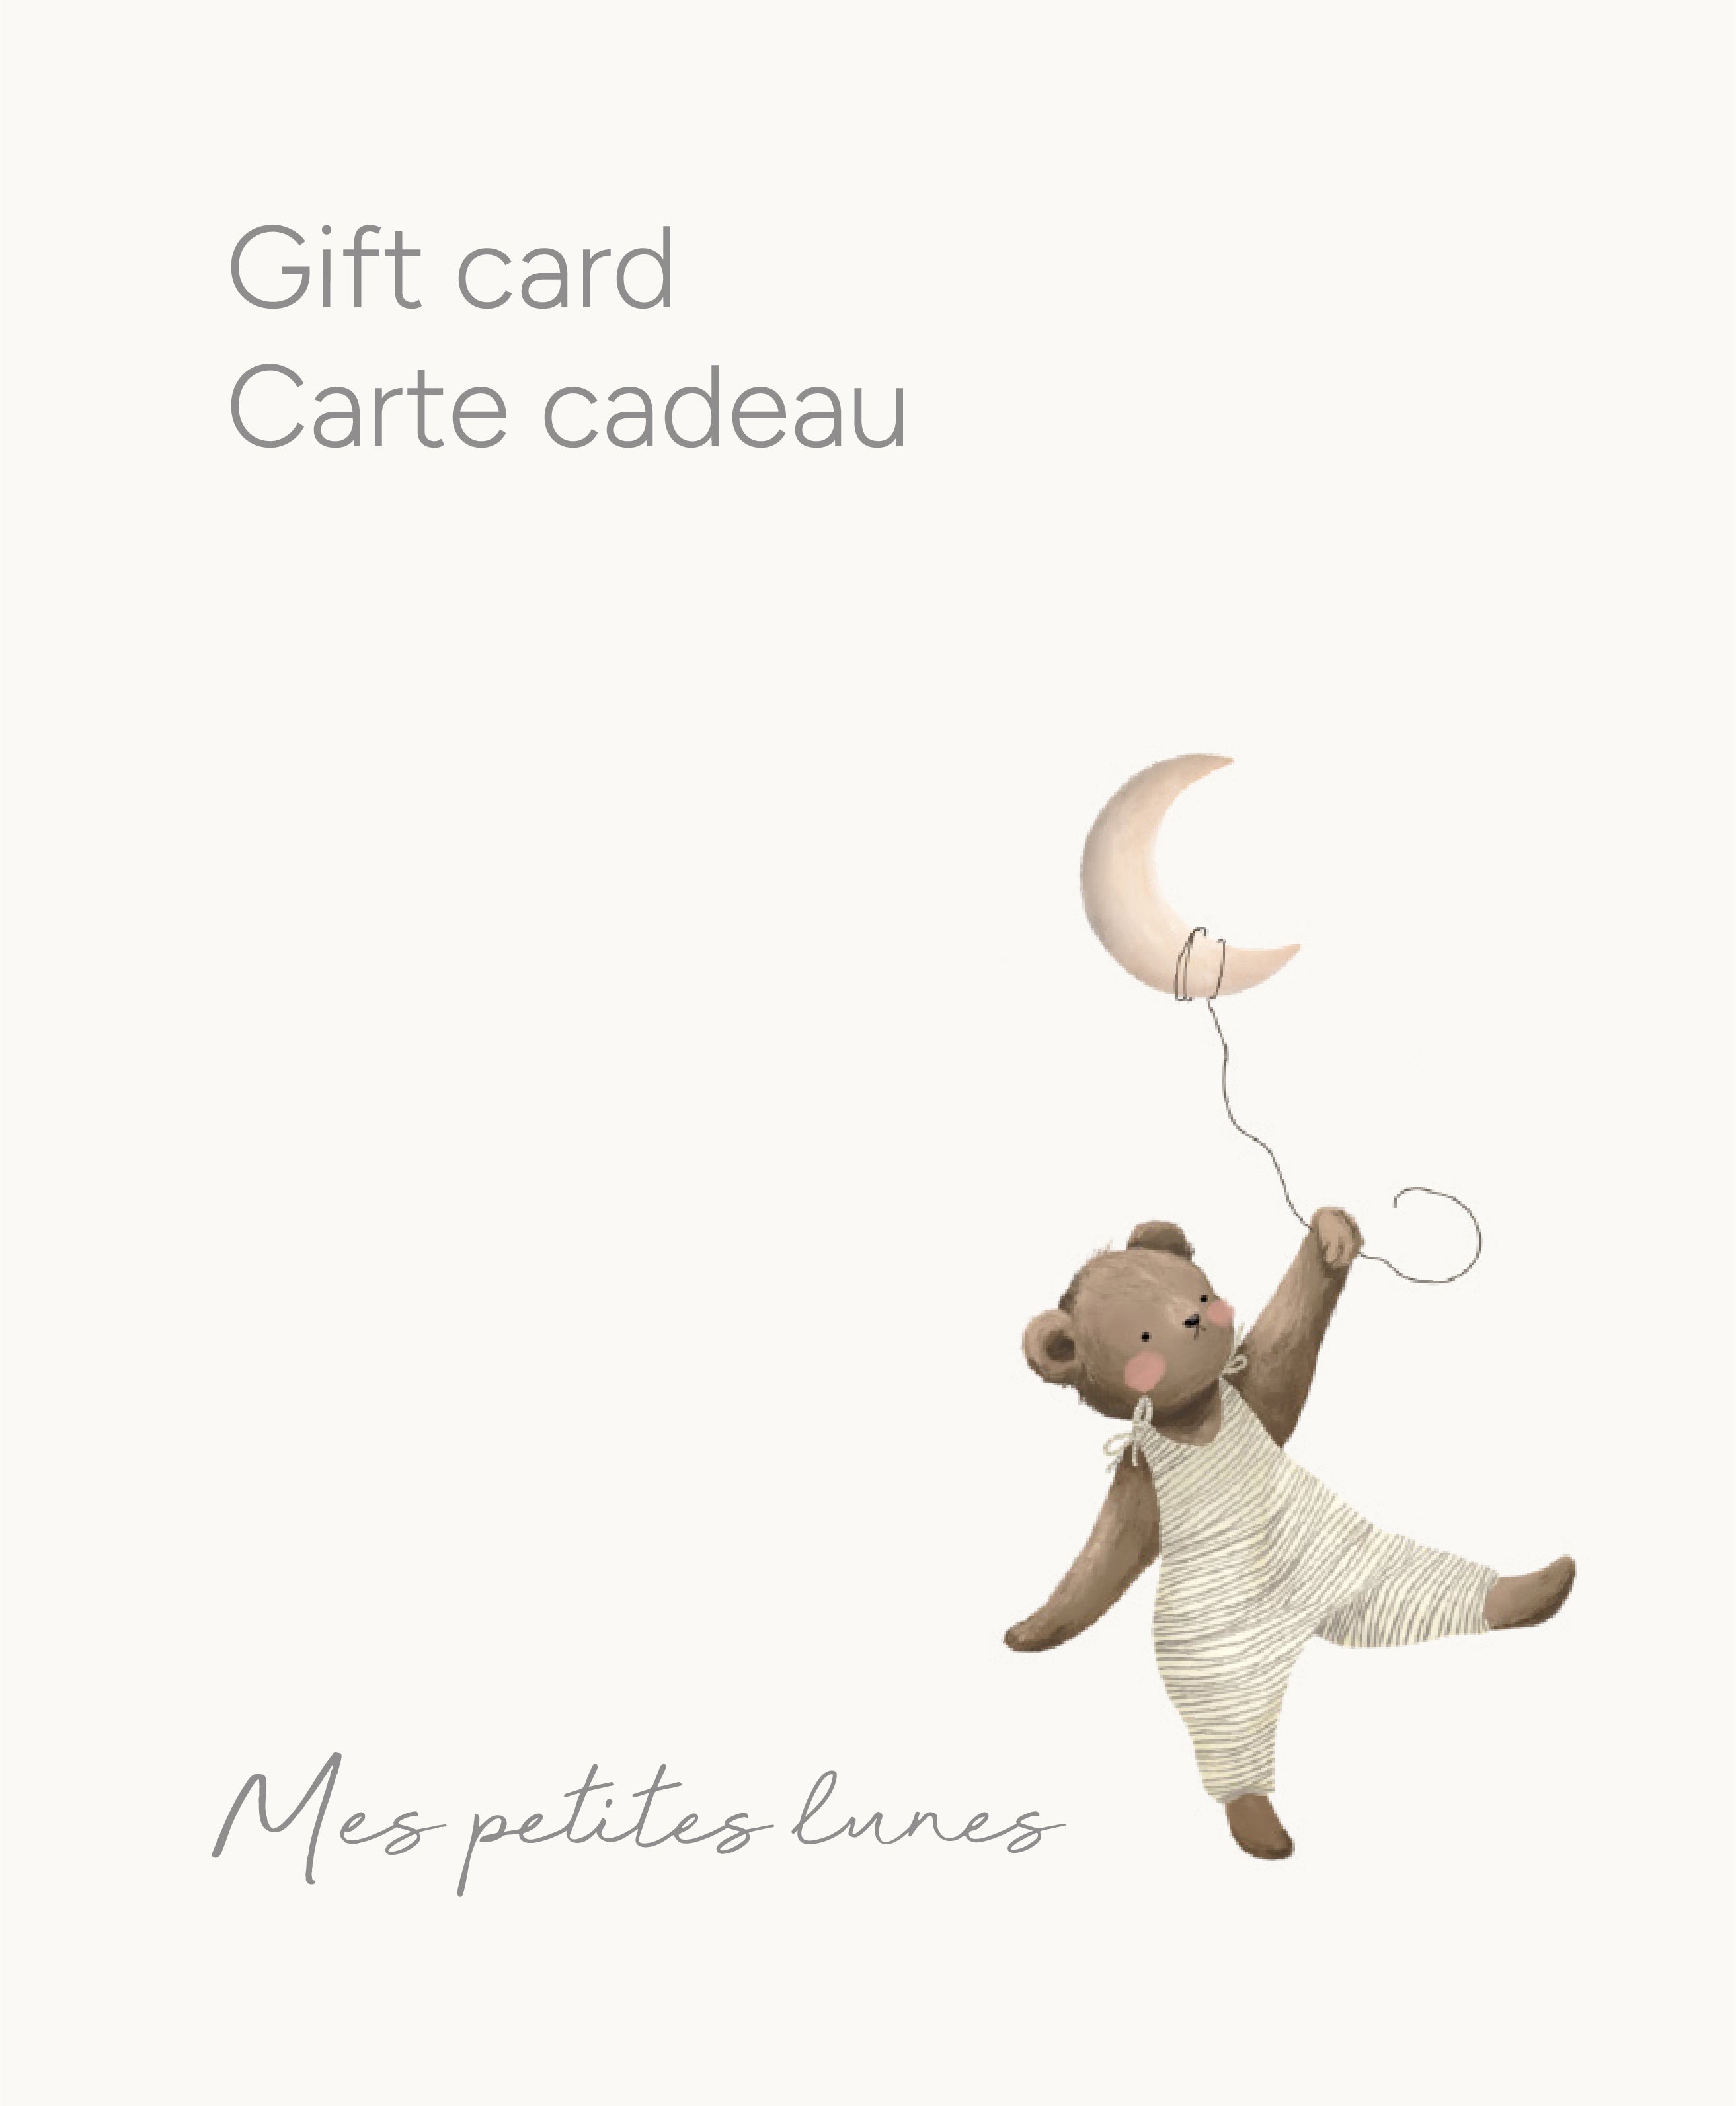 Mes petites lunes Gift Card